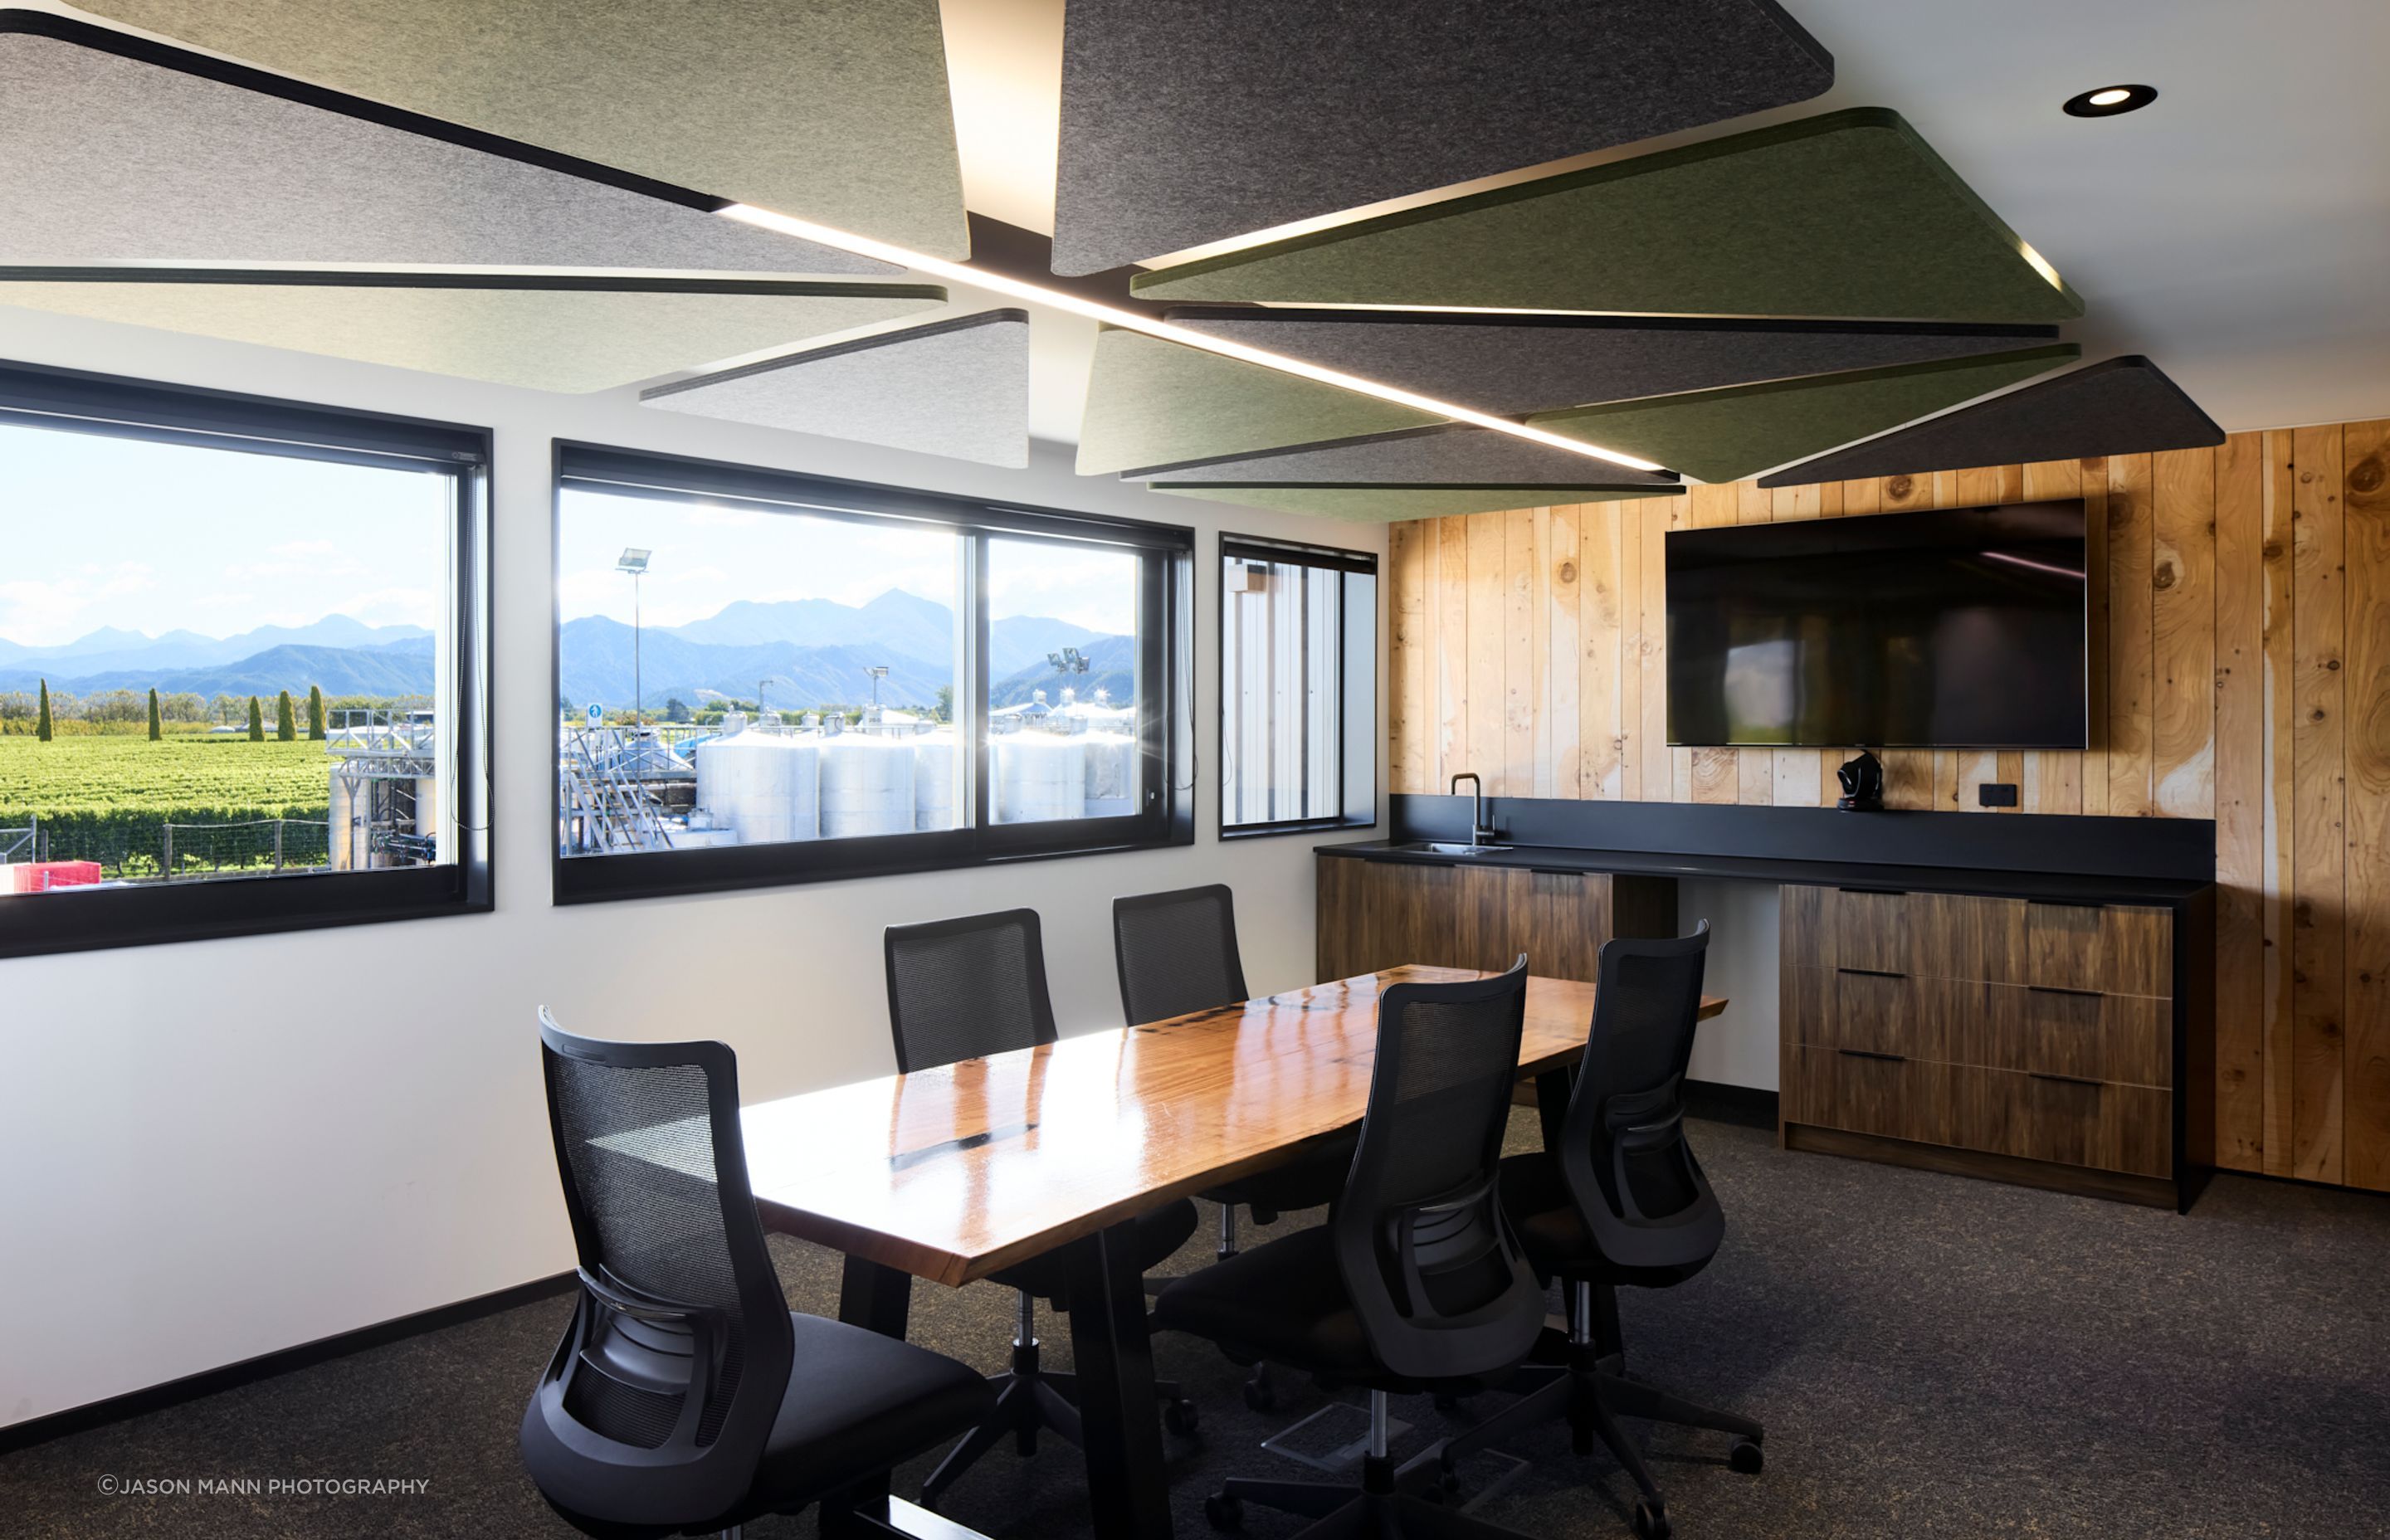 Upstairs, an open-plan office space includes a boardroom.